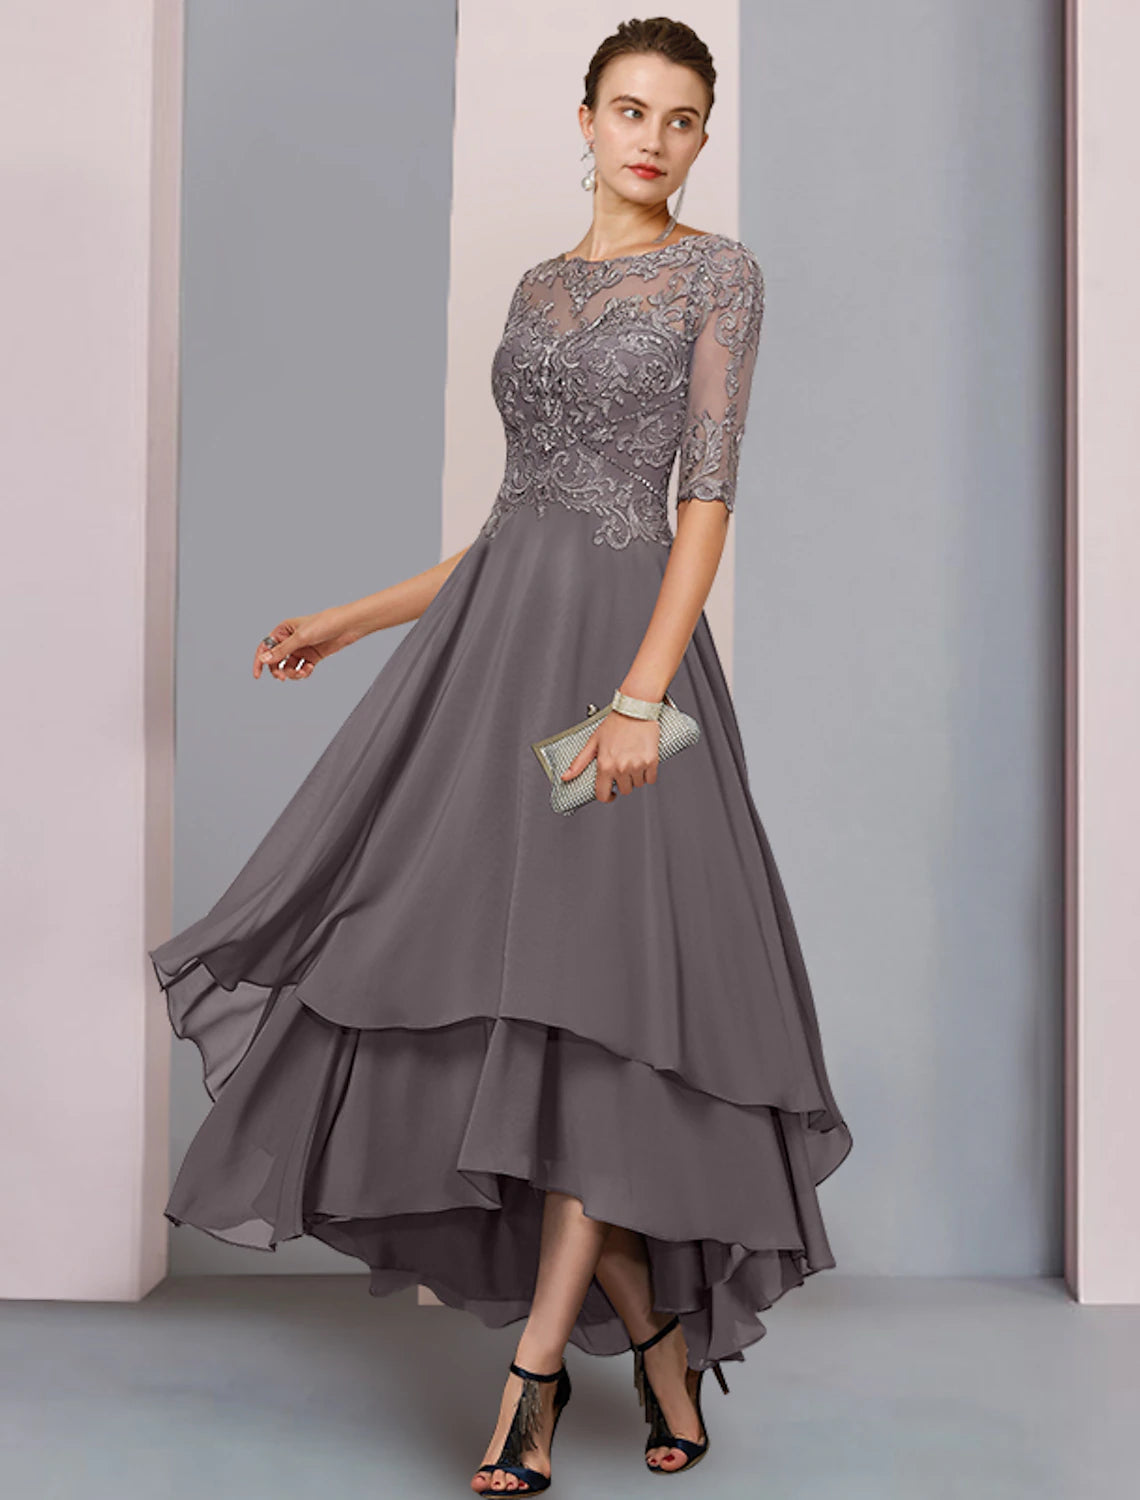 A-Line Mother of the Bride Dress Formal Wedding Guest Elegant Scoop Neck Asymmetrical Tea Length Chiffon Lace 3/4 Length Sleeve with Beading Tier Appliques